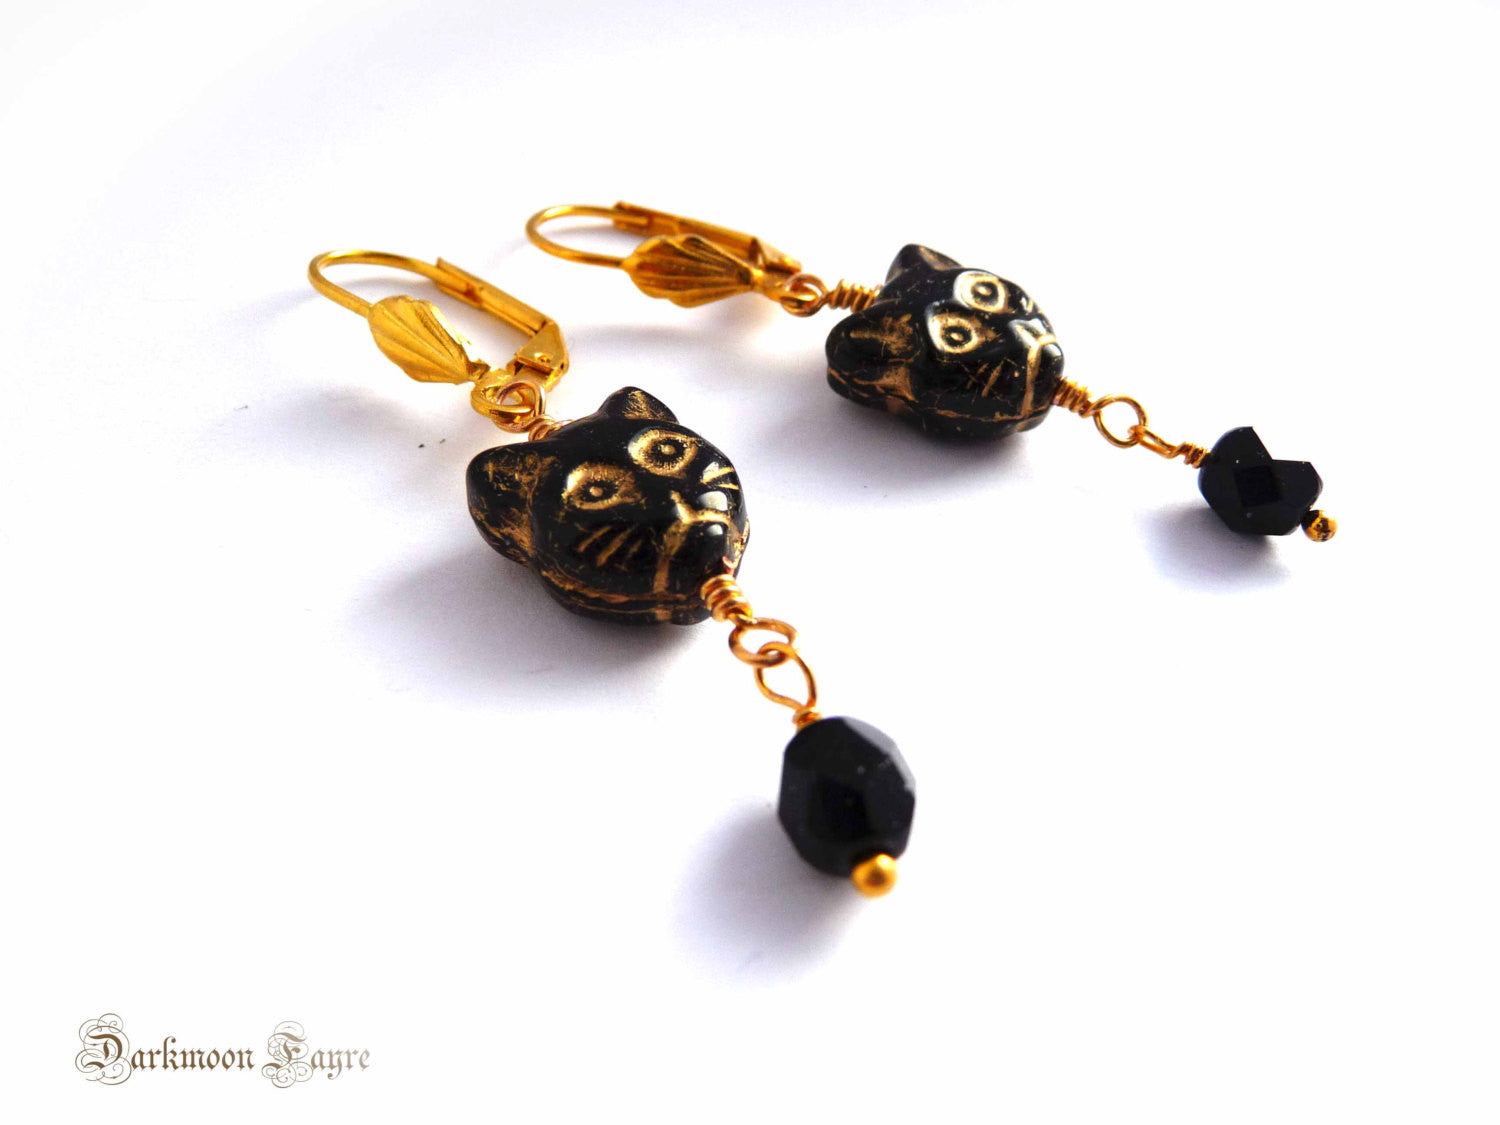 Black Glass Cat Face & Black Faceted Bead Earrings. Czech Pressed and Fire Polished Glass. Hand Wired Wrapped. Yellow Gold Plate Findings. - Darkmoon Fayre